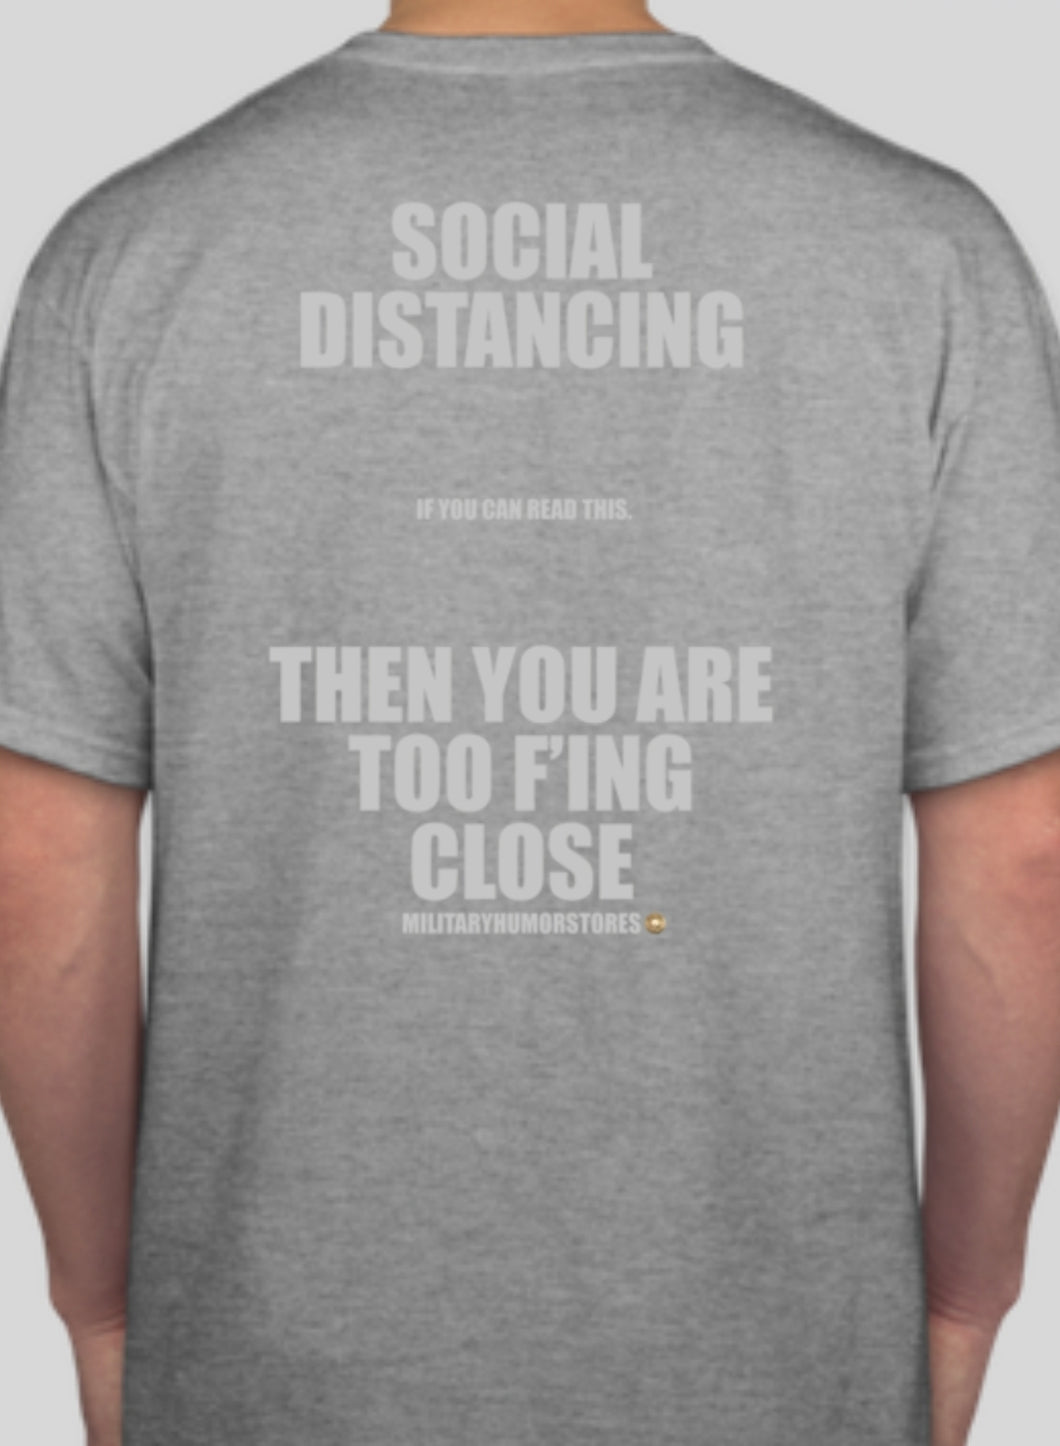 Military Humor - The Social Distance - Military Humor Stores